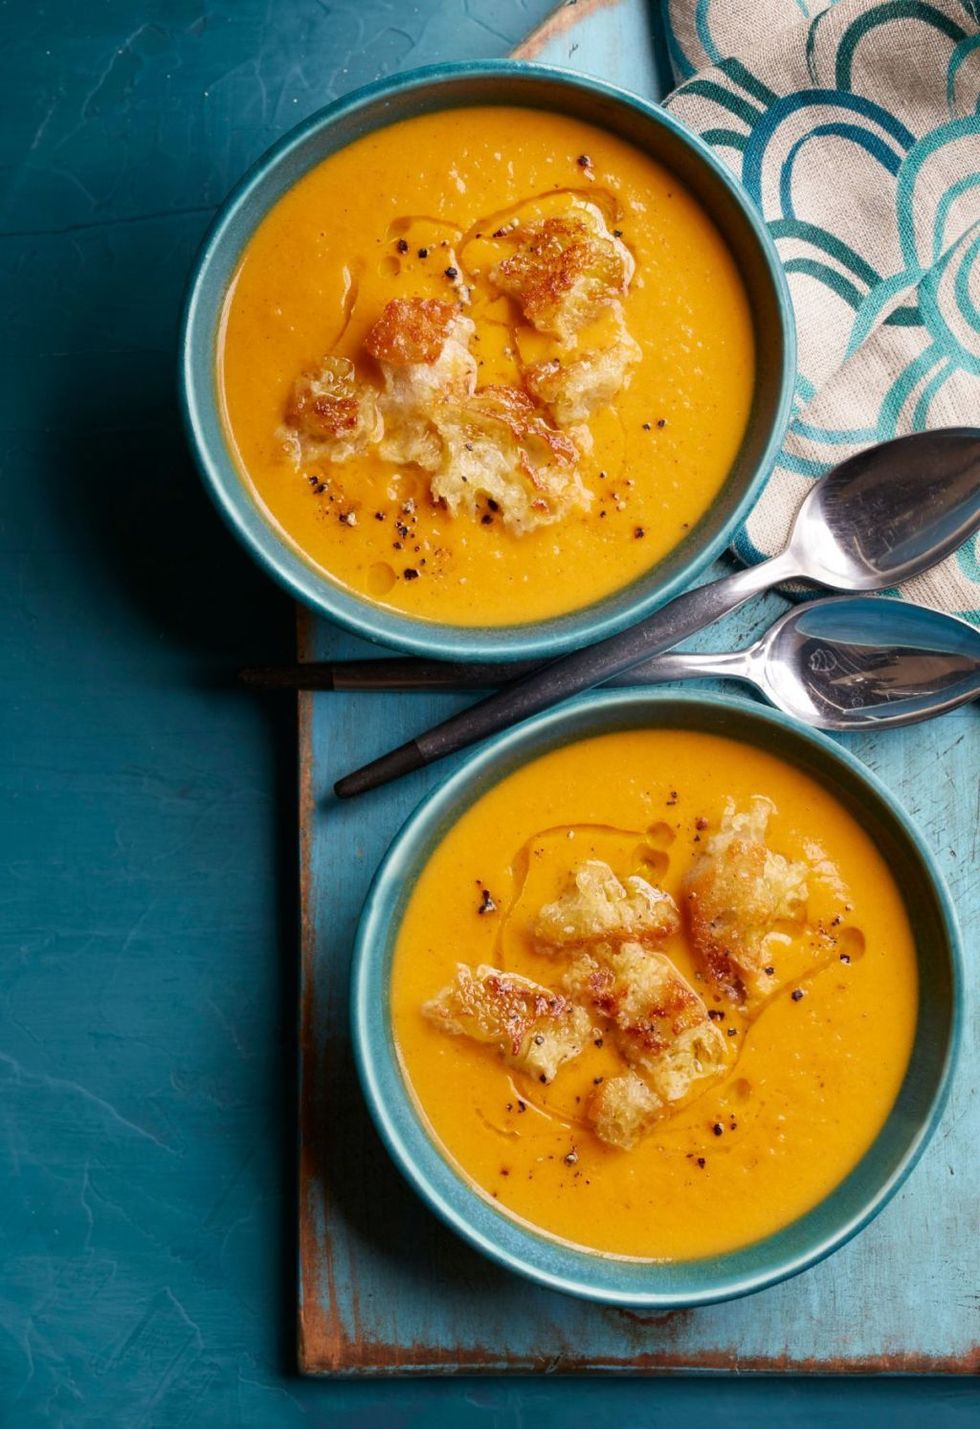 Cinnamon Spiced Sweet Potato Soup with Maple Croutons